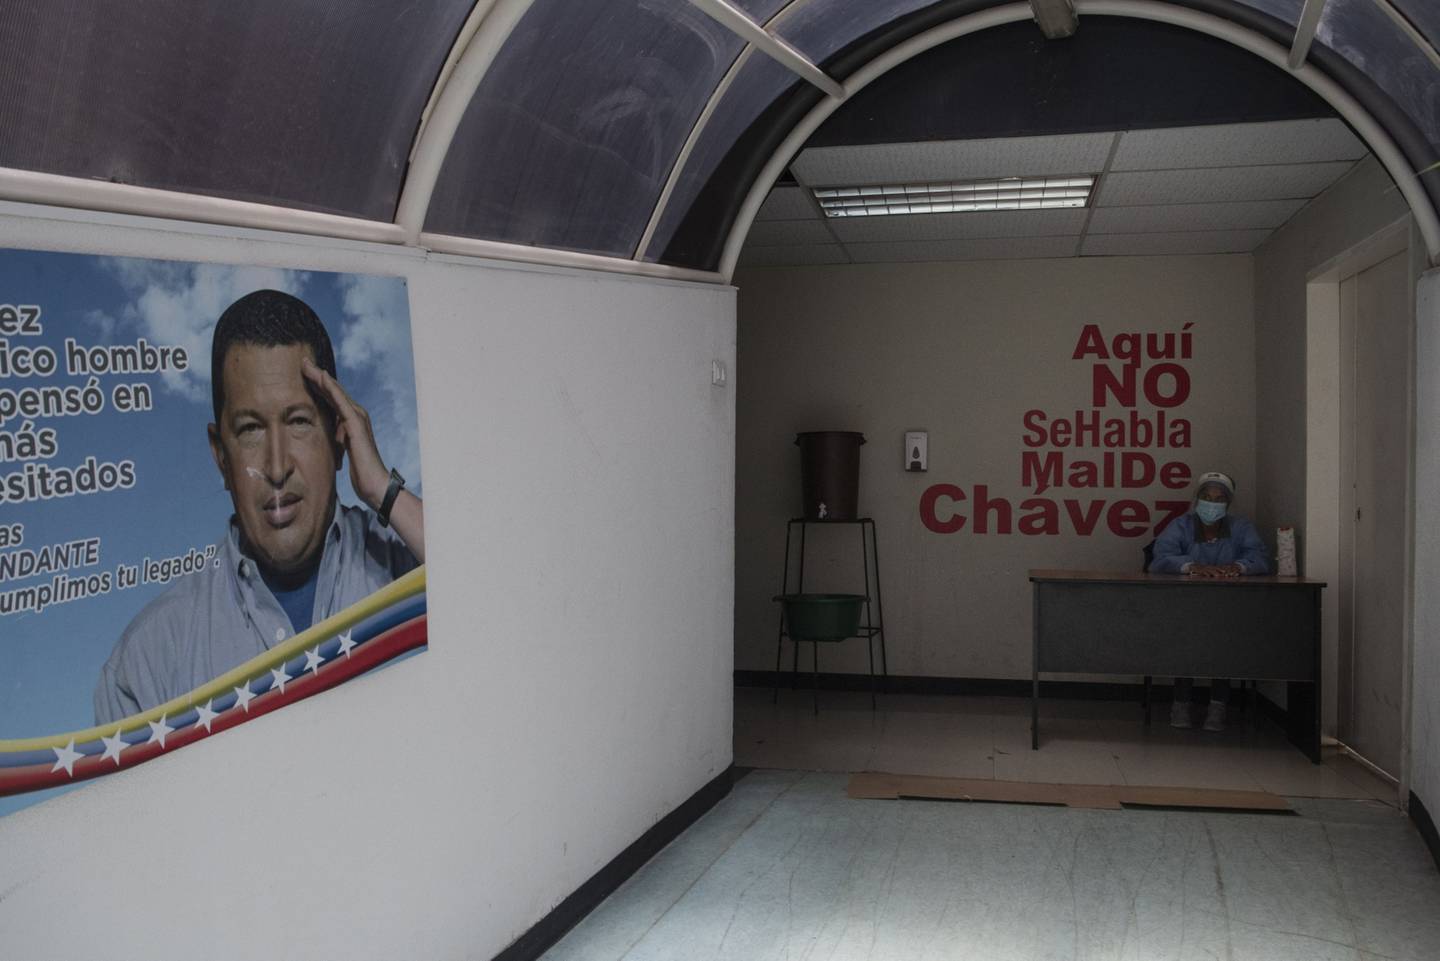 An image of the late President Hugo Chavez at the entrance of the Ana Francisca Perez de Leon II hospital in Caracas, Venezuela, on Wednesday, Aug. 26, 2020. Venezuela, which registered few coronavirus cases in the first months of the pandemic, is now facing a spike and is embracing China's approach of forced isolation combined with other top-down measures. Photographer: Carlos Becerra/Bloomberg